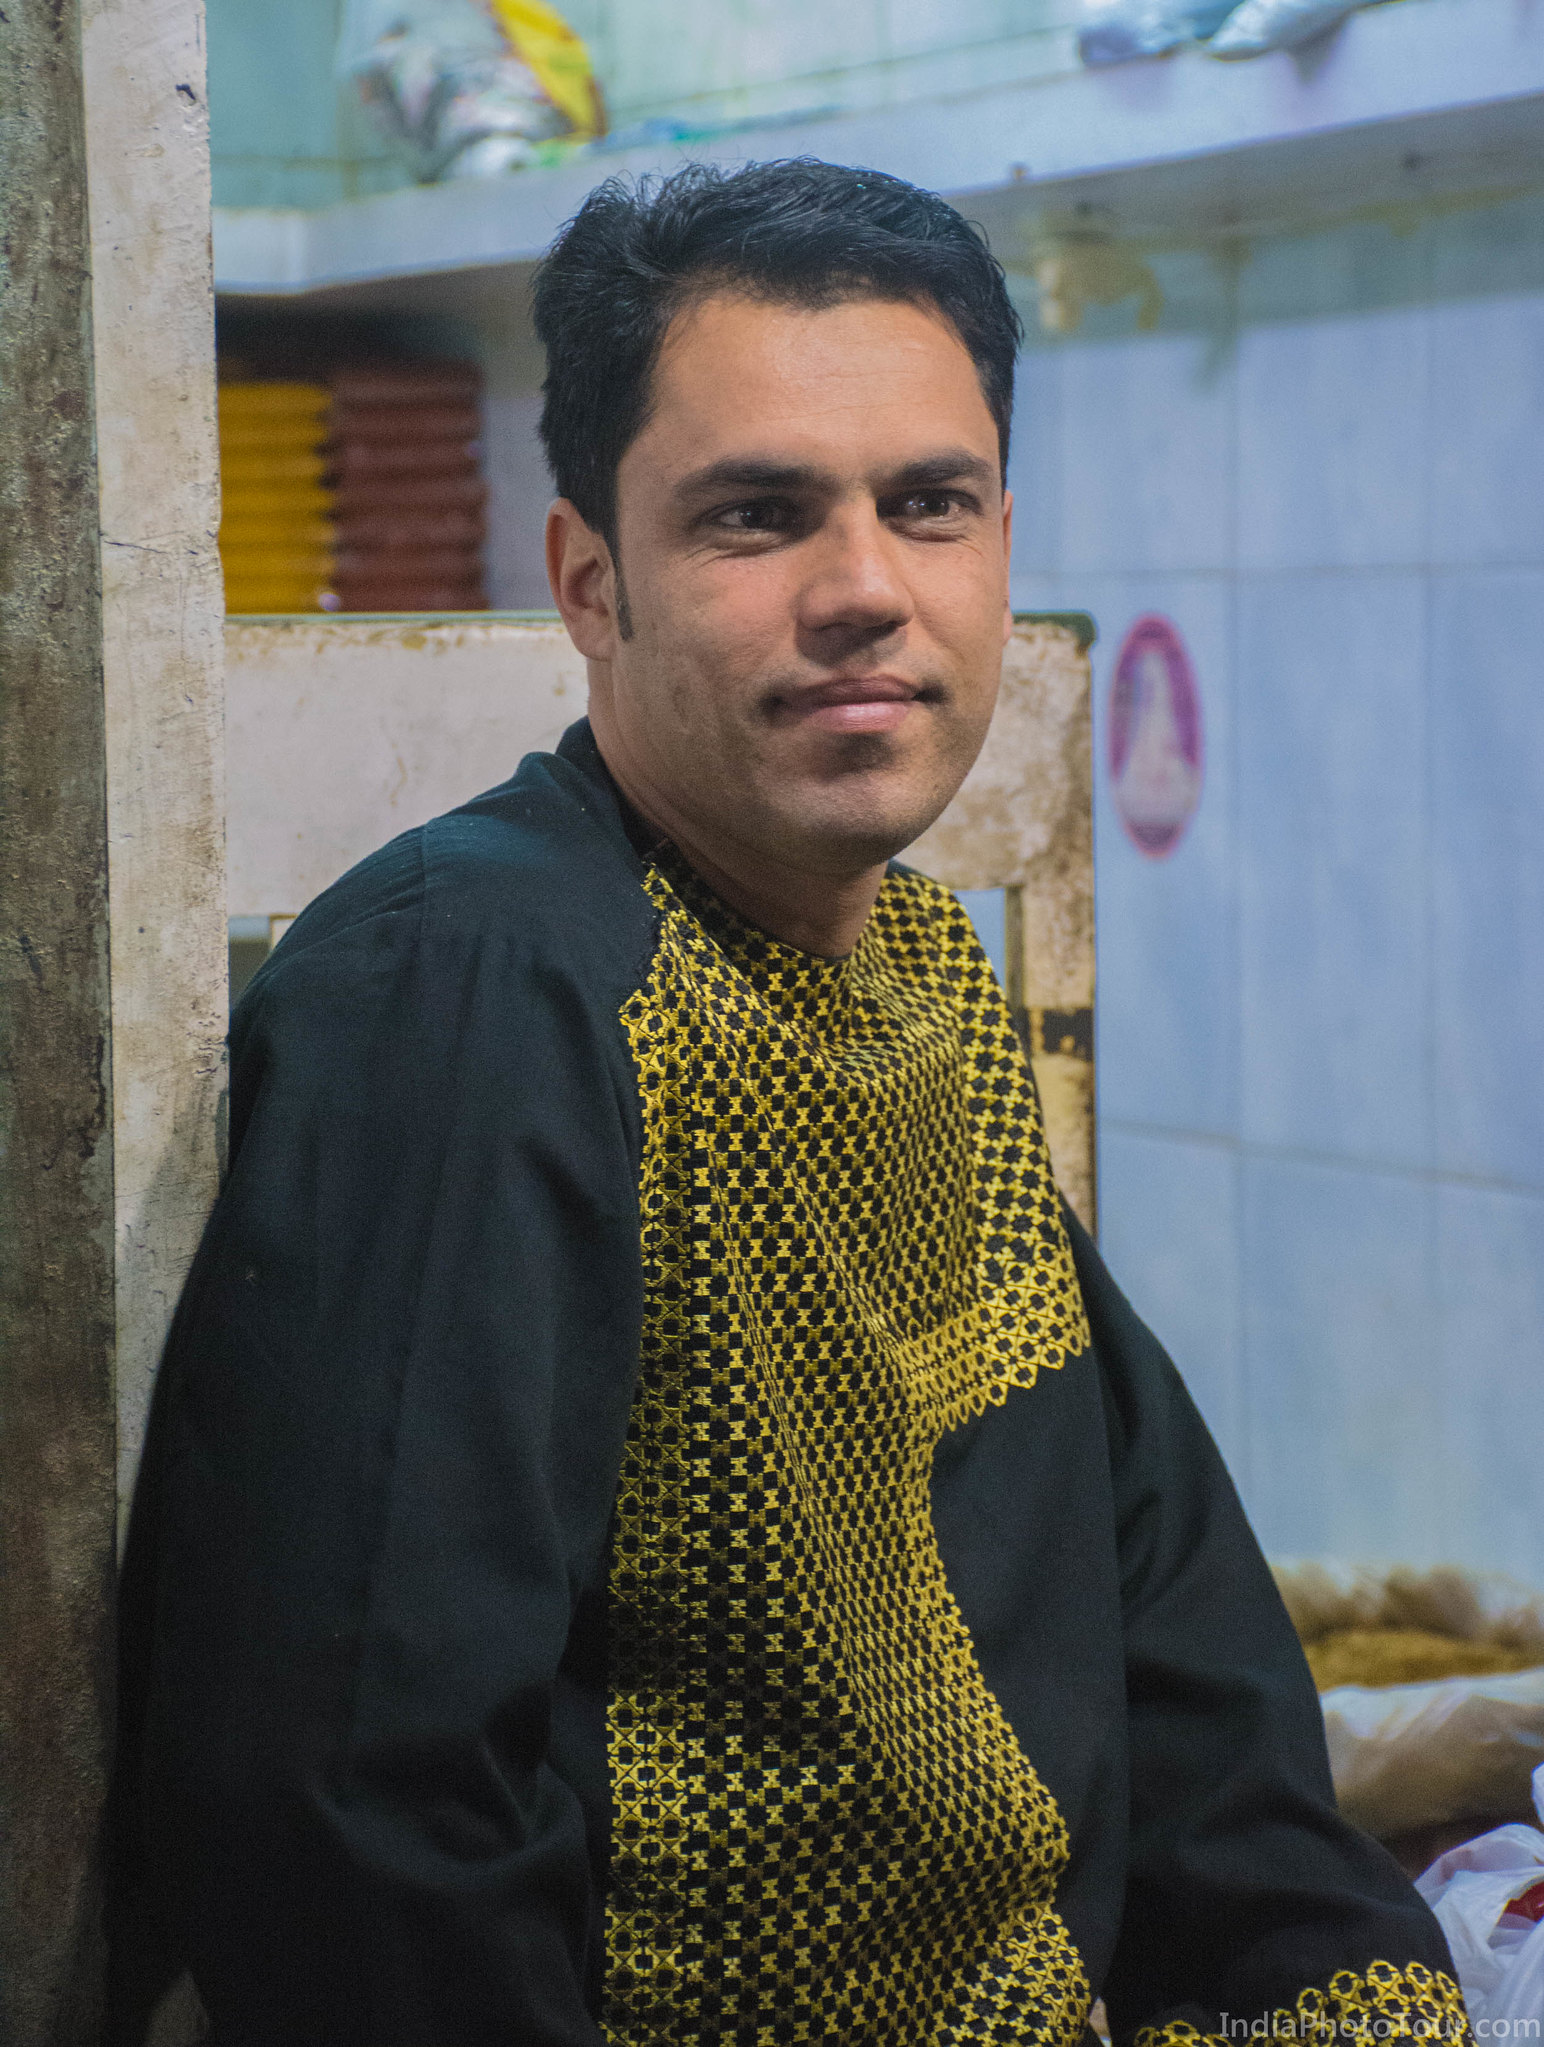 A trader from Afghanistan in spice market who wanted us to take his picture